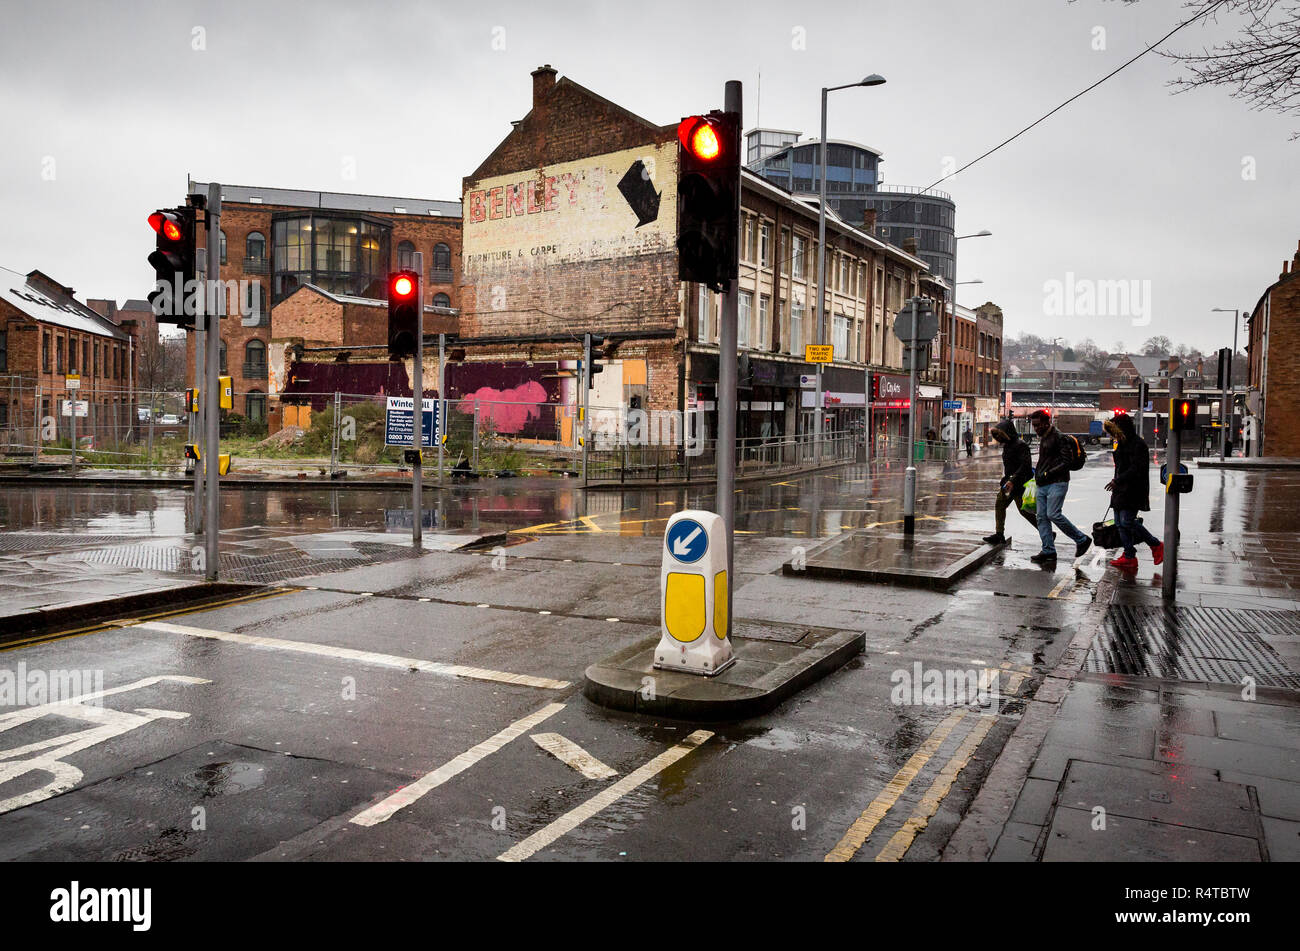 Street scenes in Nottingham, referred to as poorhouse, poorest city in the UK. Stock Photo